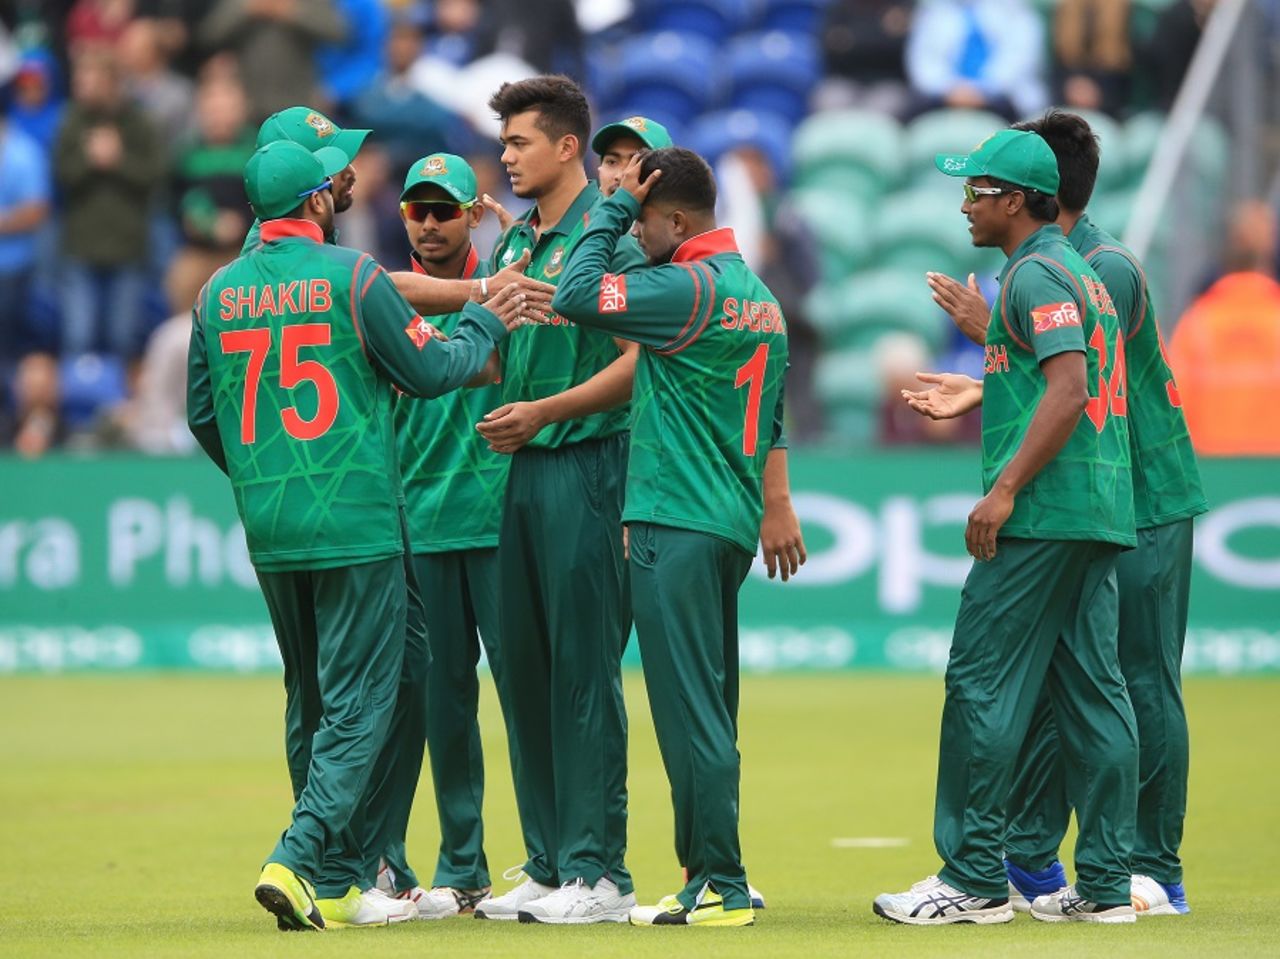 Taskin Ahmed is mobbed by his team-mates, New Zealand v Bangladesh, Group A, Champions Trophy 2017, Cardiff, June 9, 2017